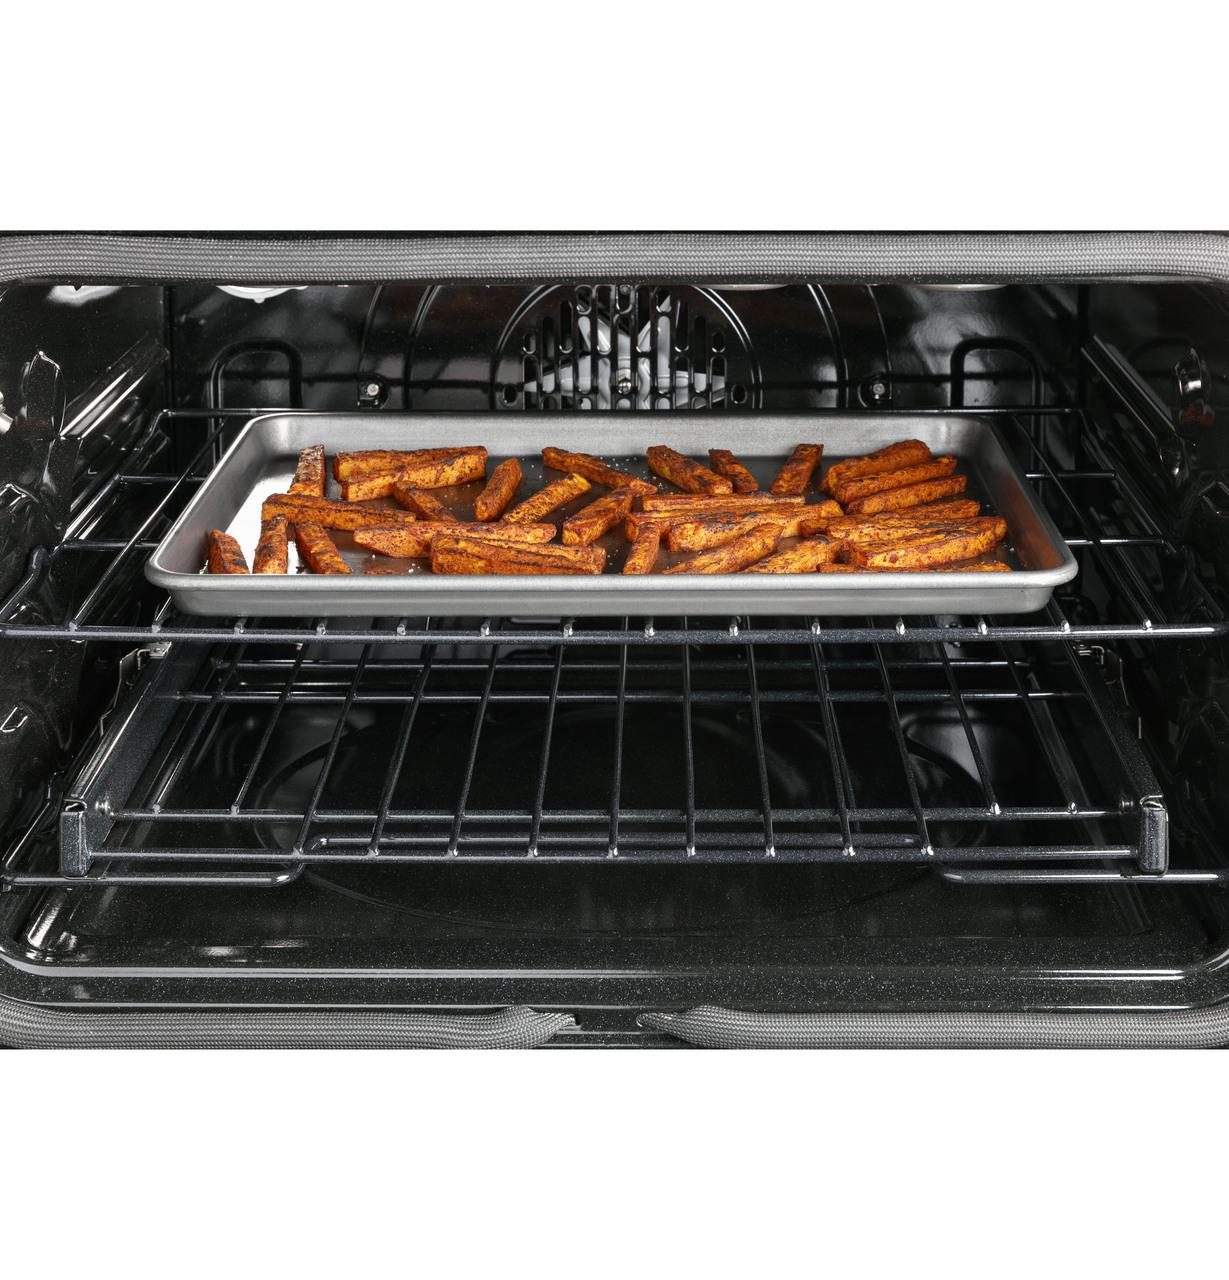 Cafe Caf(eback)™ 30" Smart Slide-In, Front-Control, Induction and Convection Double-Oven Range